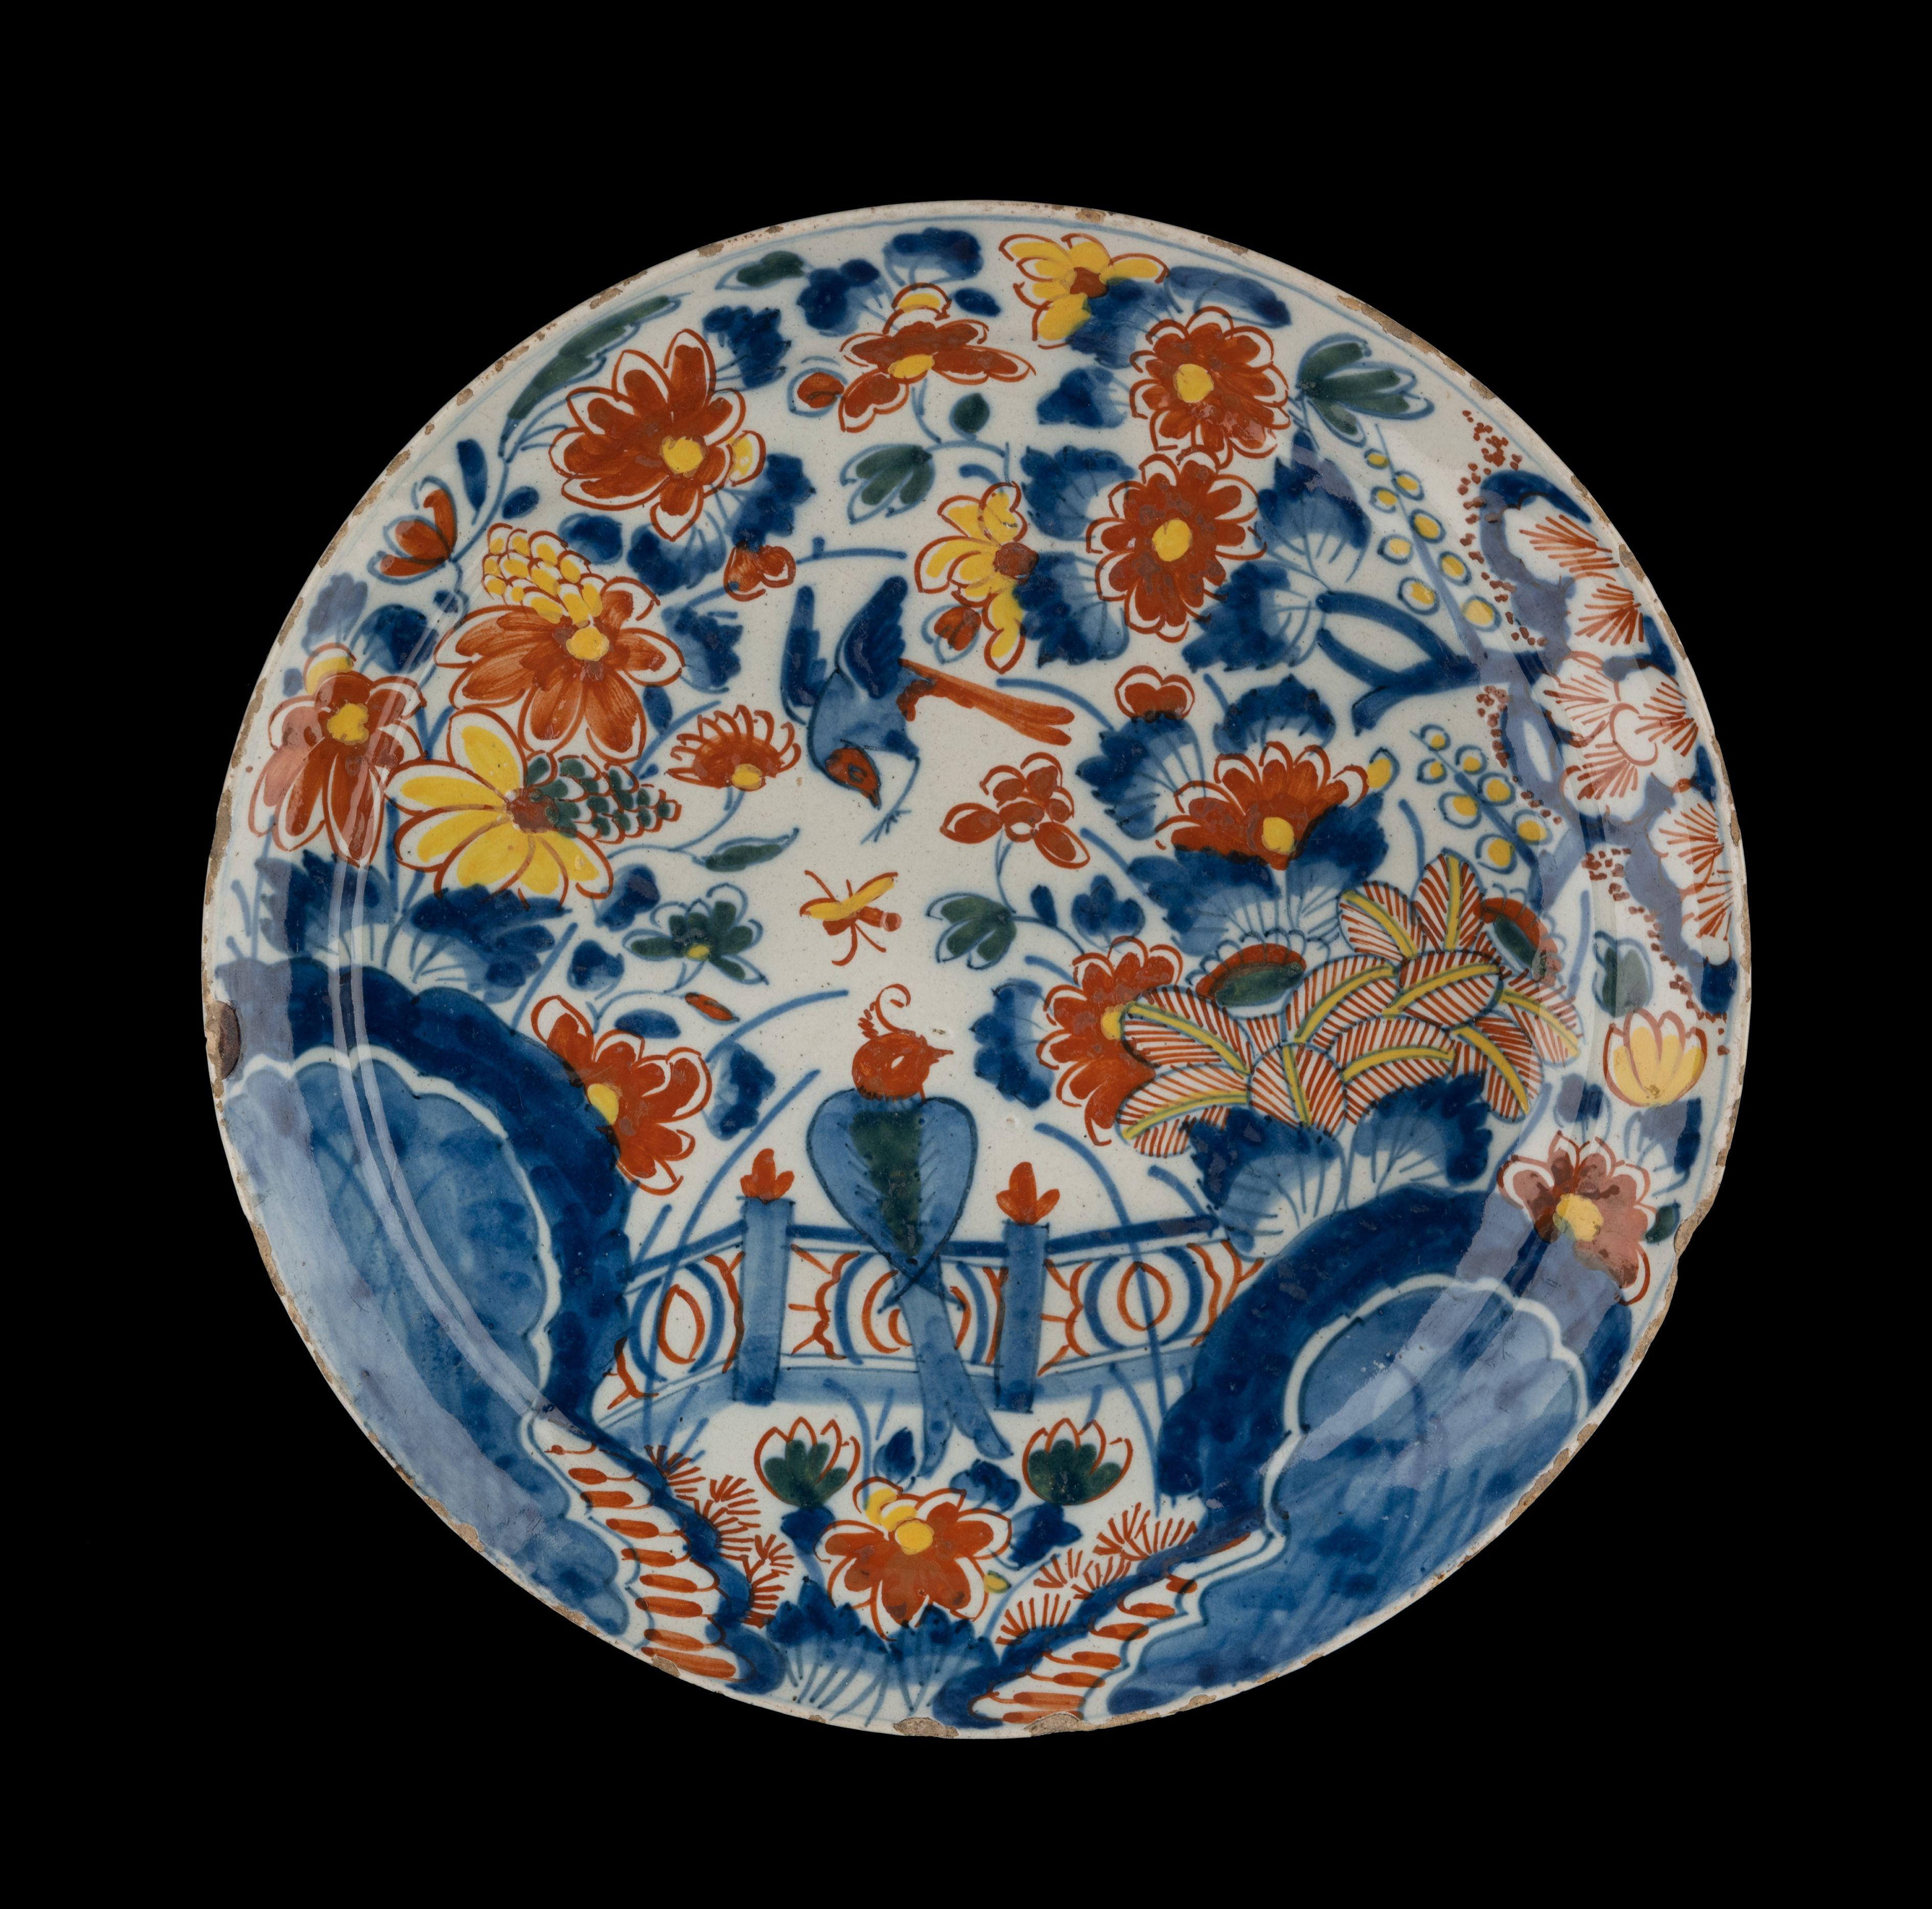 Polychrome plate with flowers. Delft, 1713-1740.

The porcelain claw pottery. 
Mark: IVL and 5, period of Johannes van Lockhorst and Margaretha van der Gucht (1713-1740).

The plate without foot rim has a narrow, flat flange and is painted in